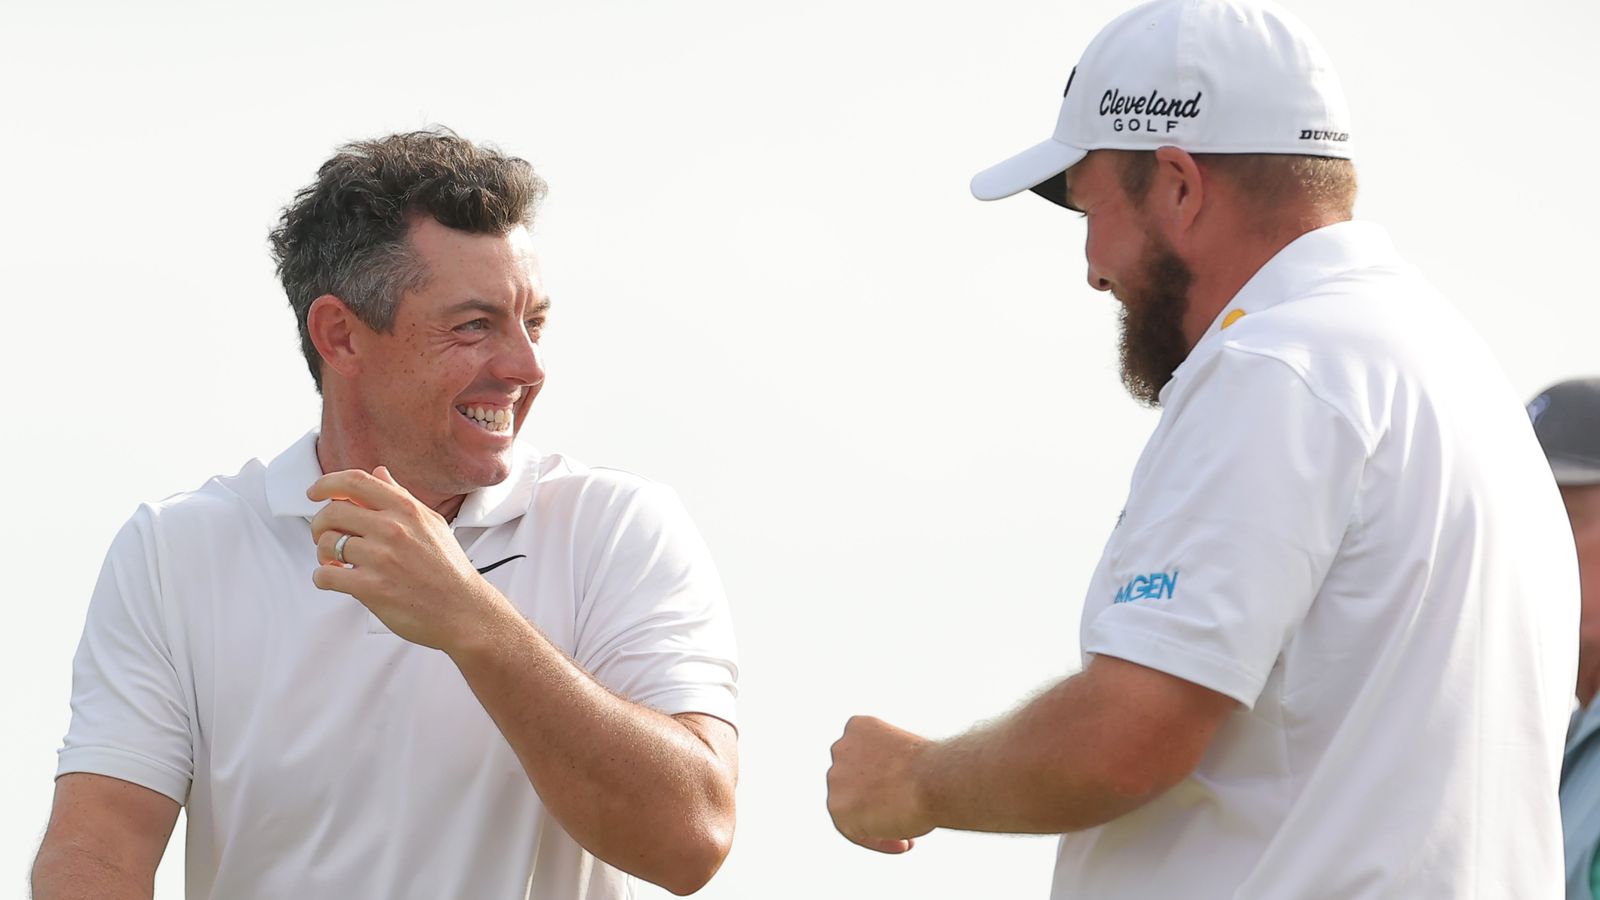 Rory McIlroy and Shane Lowry win Zurich Classic of New Orleans after play-off drama with Chad Ramey and Martin Trainer | Golf News